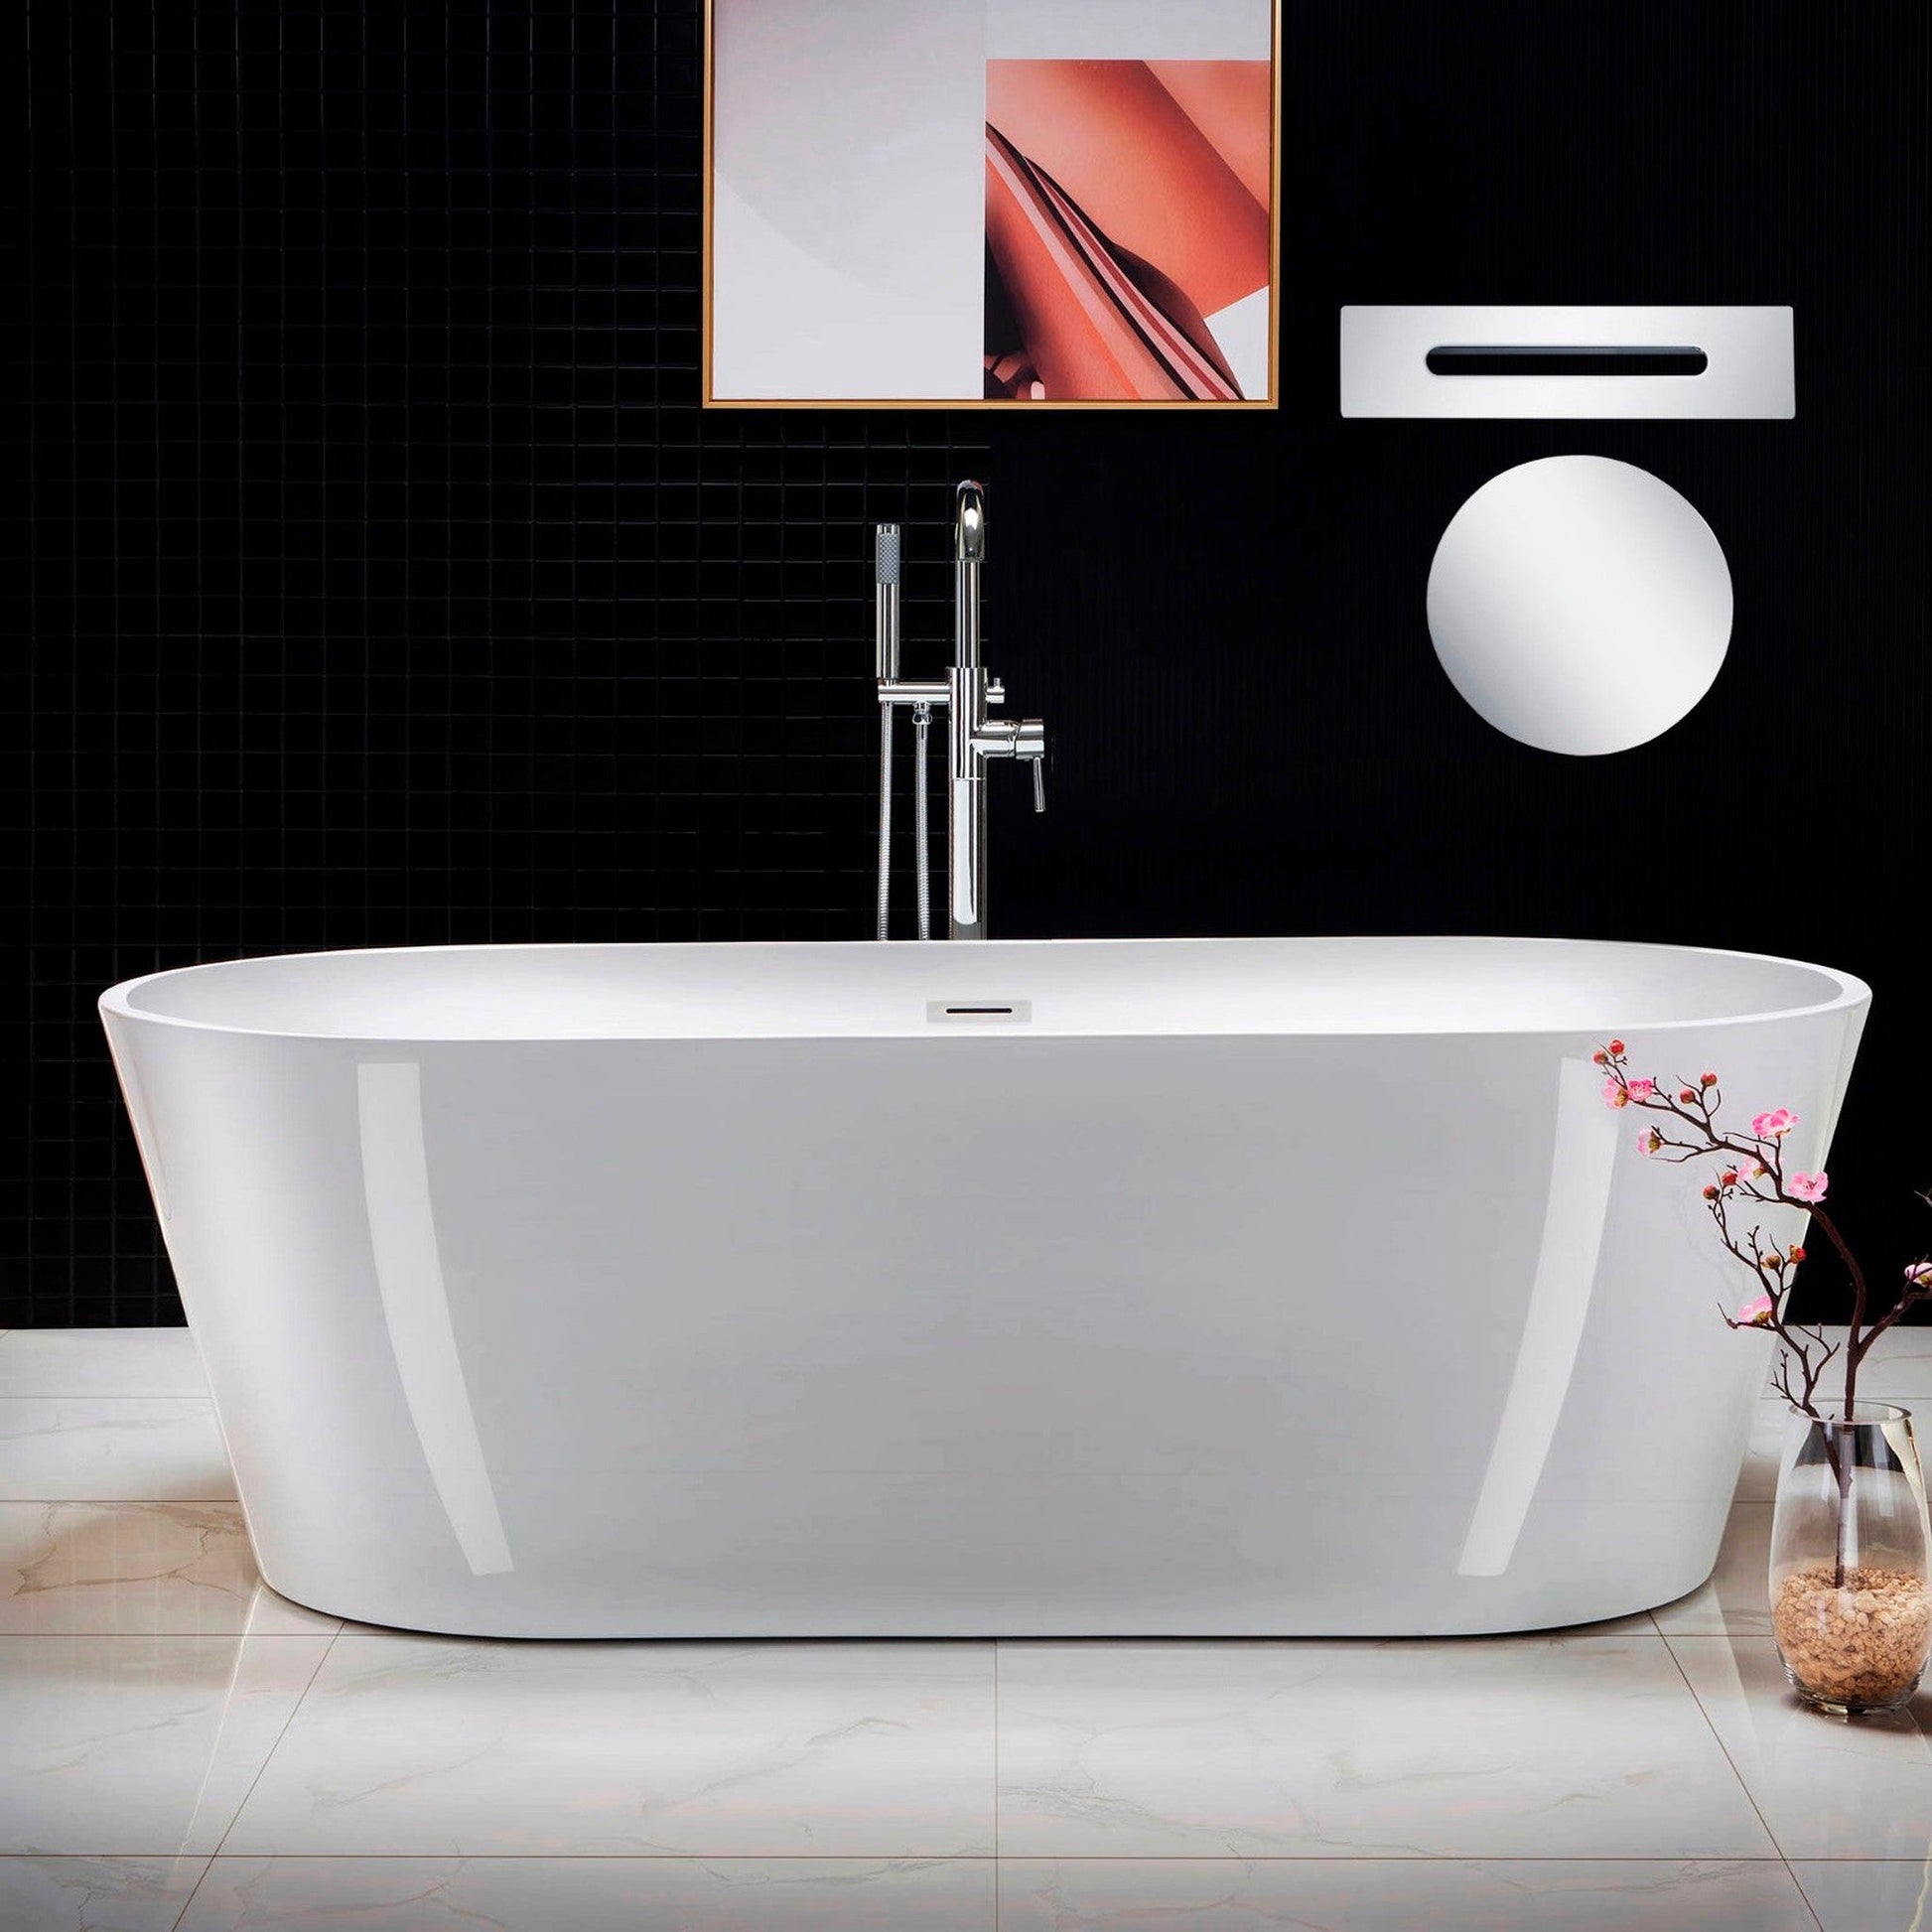 WoodBridge 71" White Acrylic Freestanding Contemporary Soaking Bathtub With Chrome Drain, Overflow, F-0013 Tub Filler and Caddy Tray